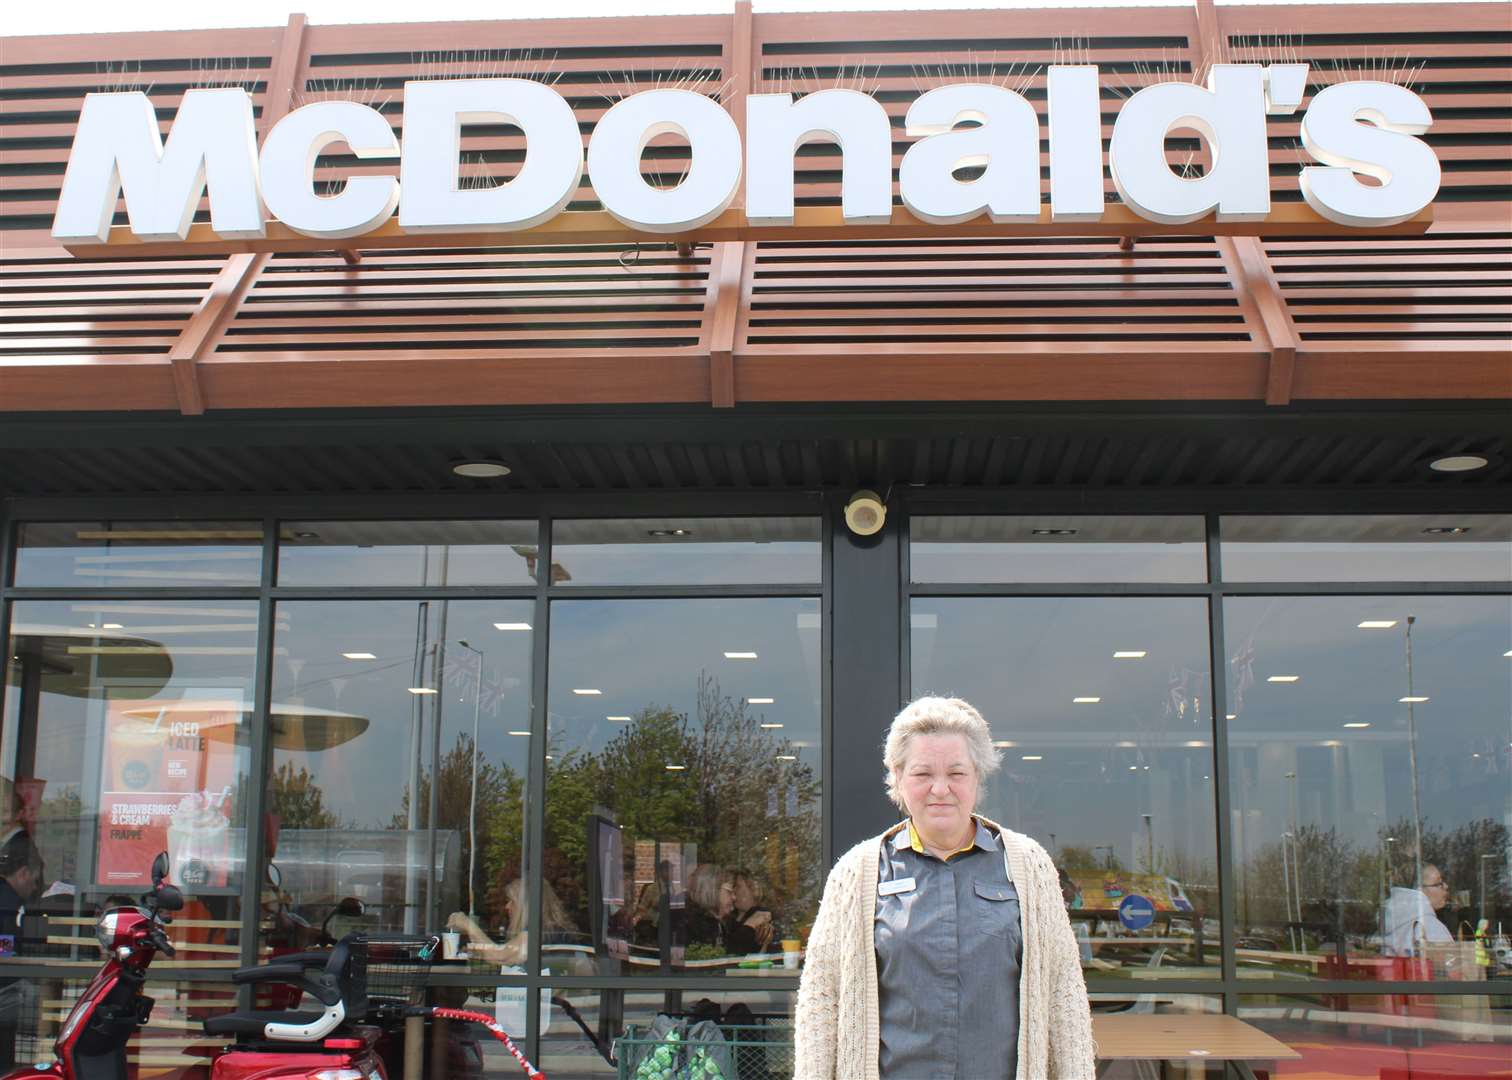 Alison Pryor is retiring after 20 years as a lobby host at McDonald's